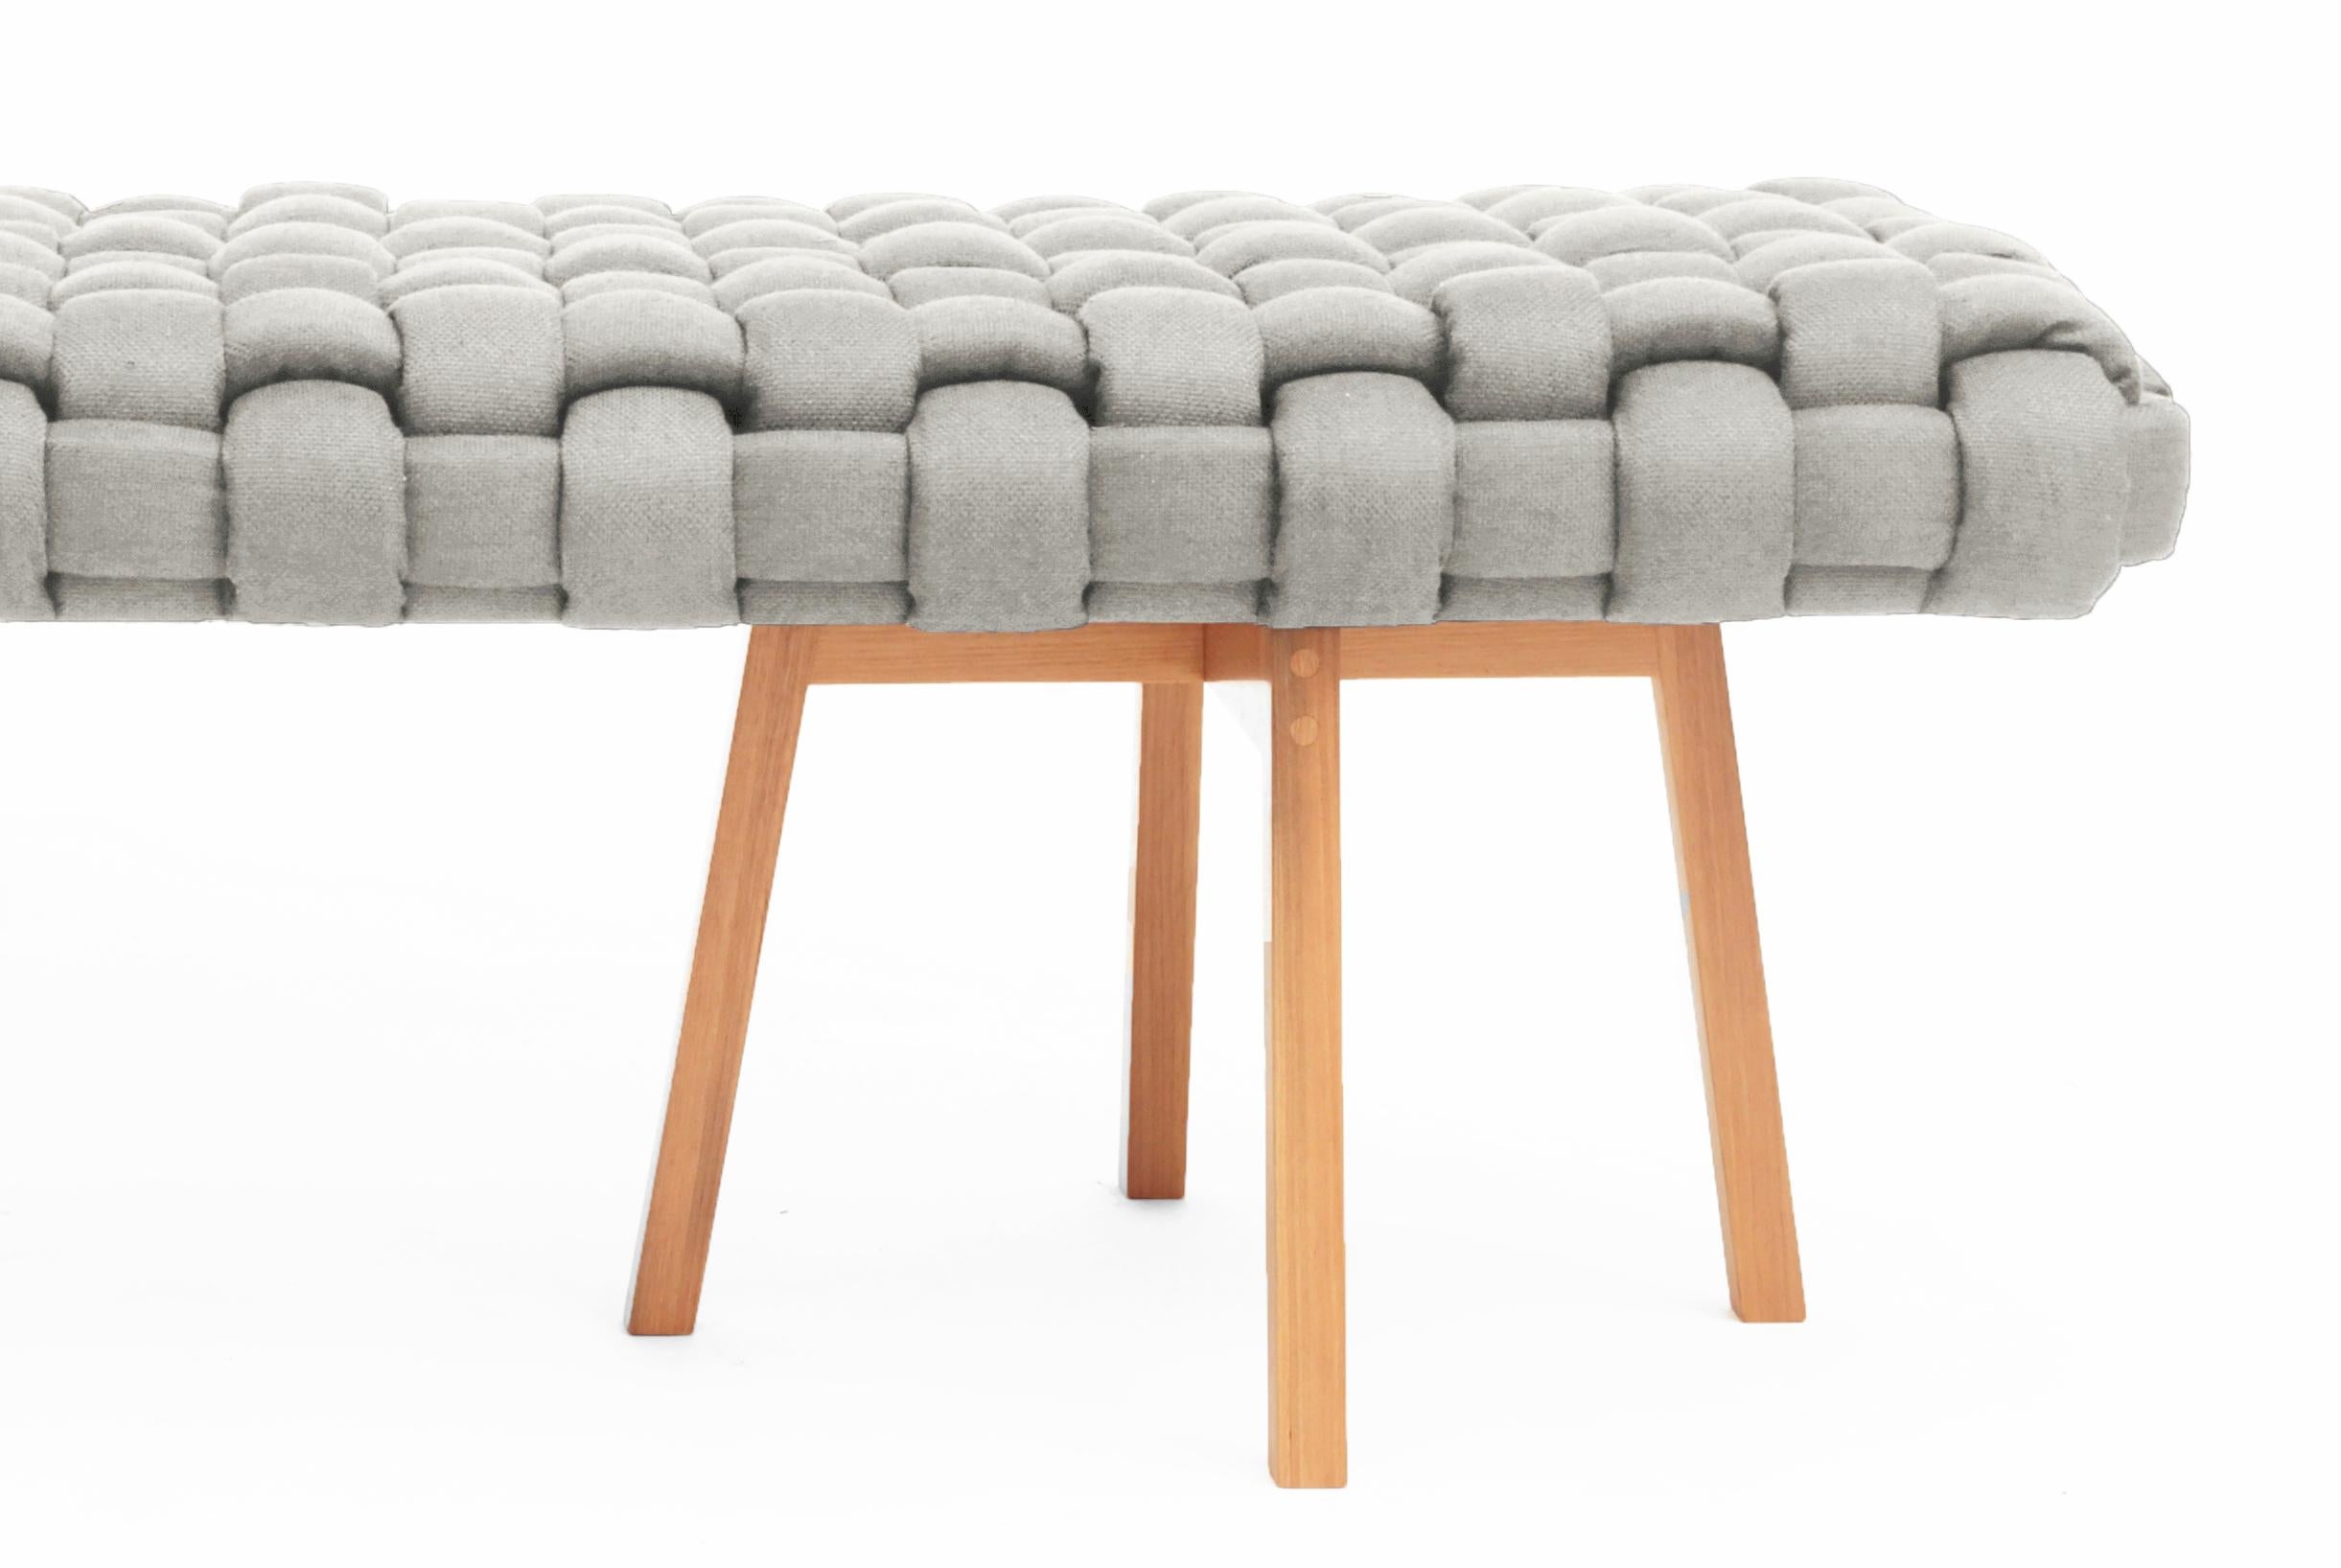 Brazilian Contemporary Wood Bench, Handwoven Upholstery, the 